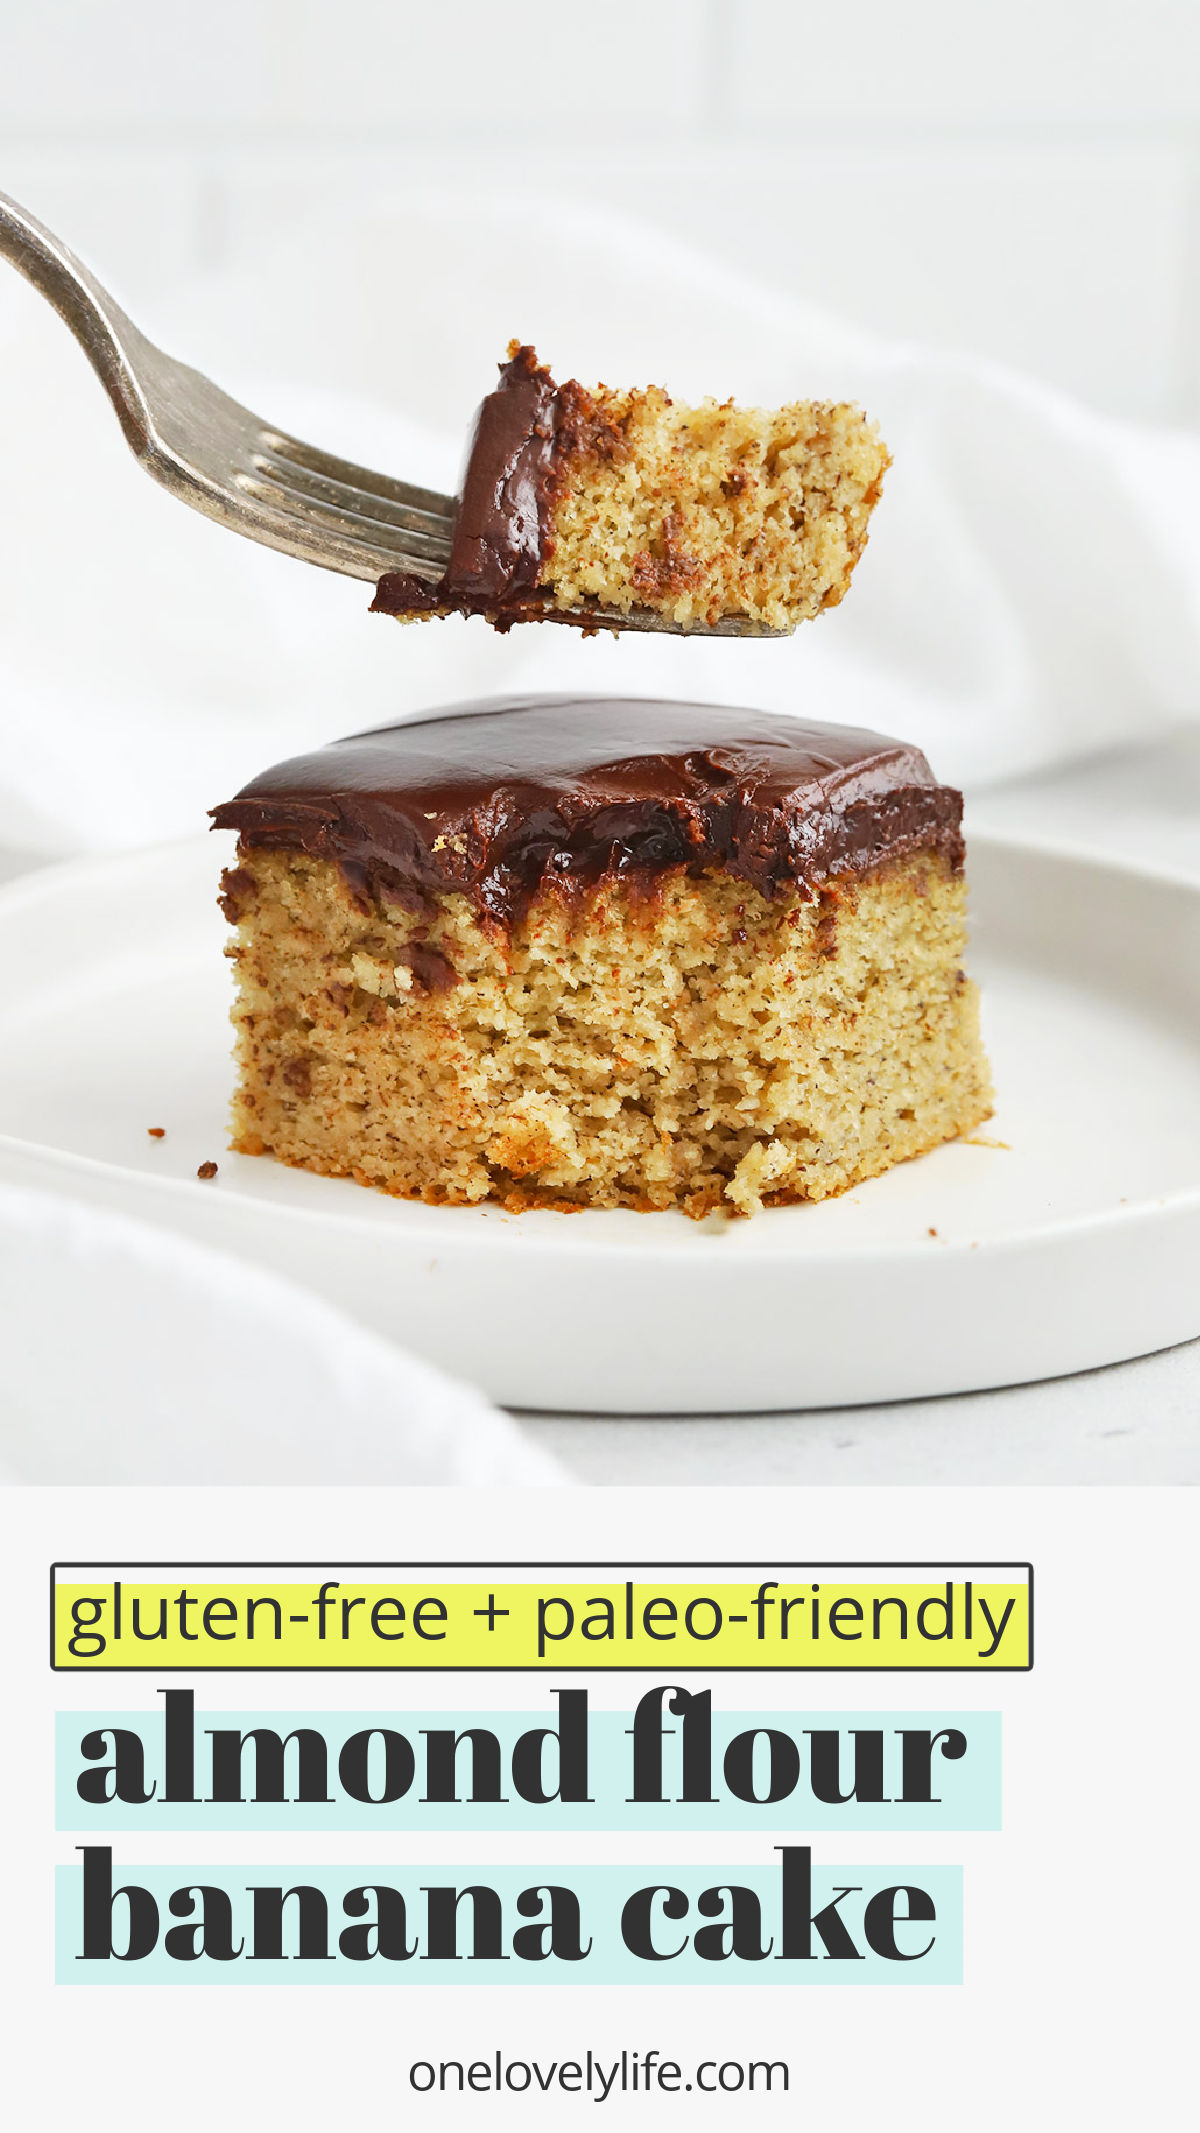 Almond Flour Banana Cake - This easy gluten-free banana cake with chocolate ganache is the perfect way to use up overripe bananas! (Healthy, paleo friendly, and absolutely amazing!) // Healthy Banana Cake // Paleo Banana Cake // Gluten Free Banana Cake // Banana Cake recipe // Almond Flour cake // smash cake #glutenfree #cake #bananacake #almondflour #paleo